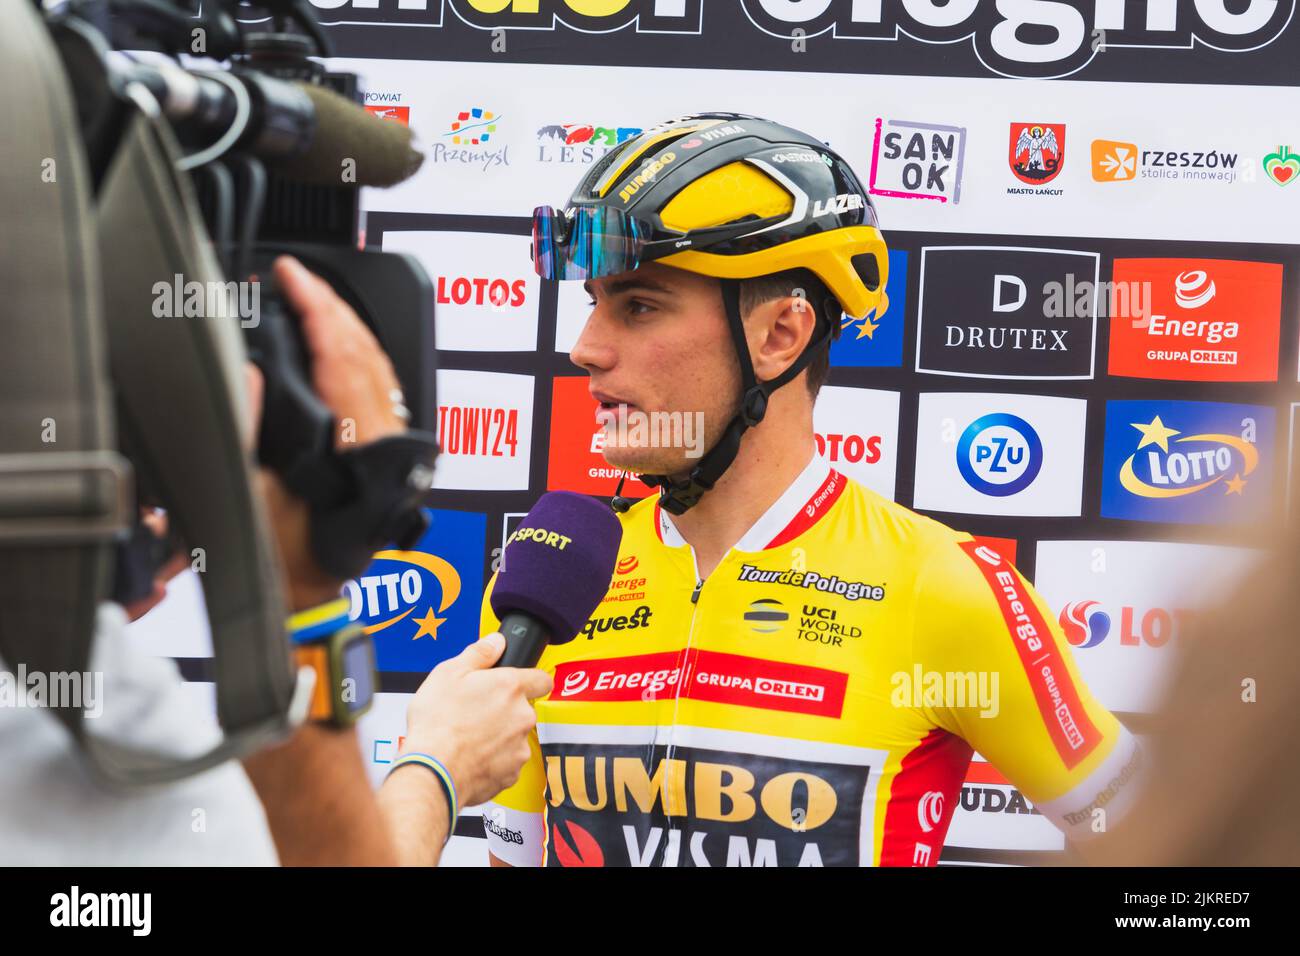 Chelm, Lubelskie, Poland - July 31, 2022: 79 tour de Pologne, Cyclist Olav Kooij giving an interview to Tvp Sport Stock Photo